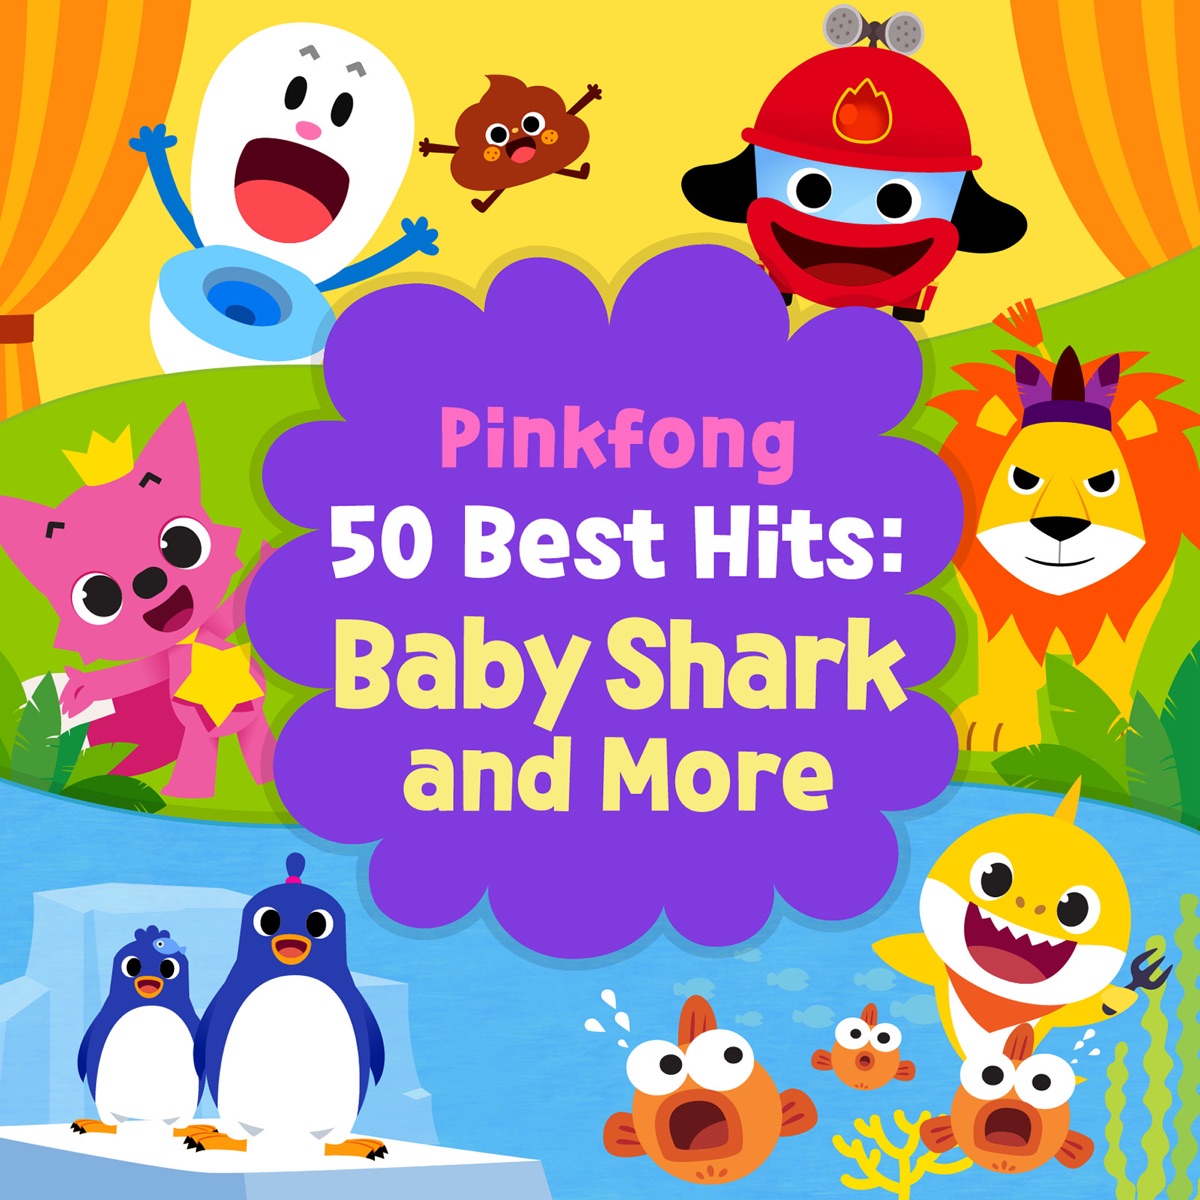 Pinkfong Animal Songs by Pinkfong on Apple Music